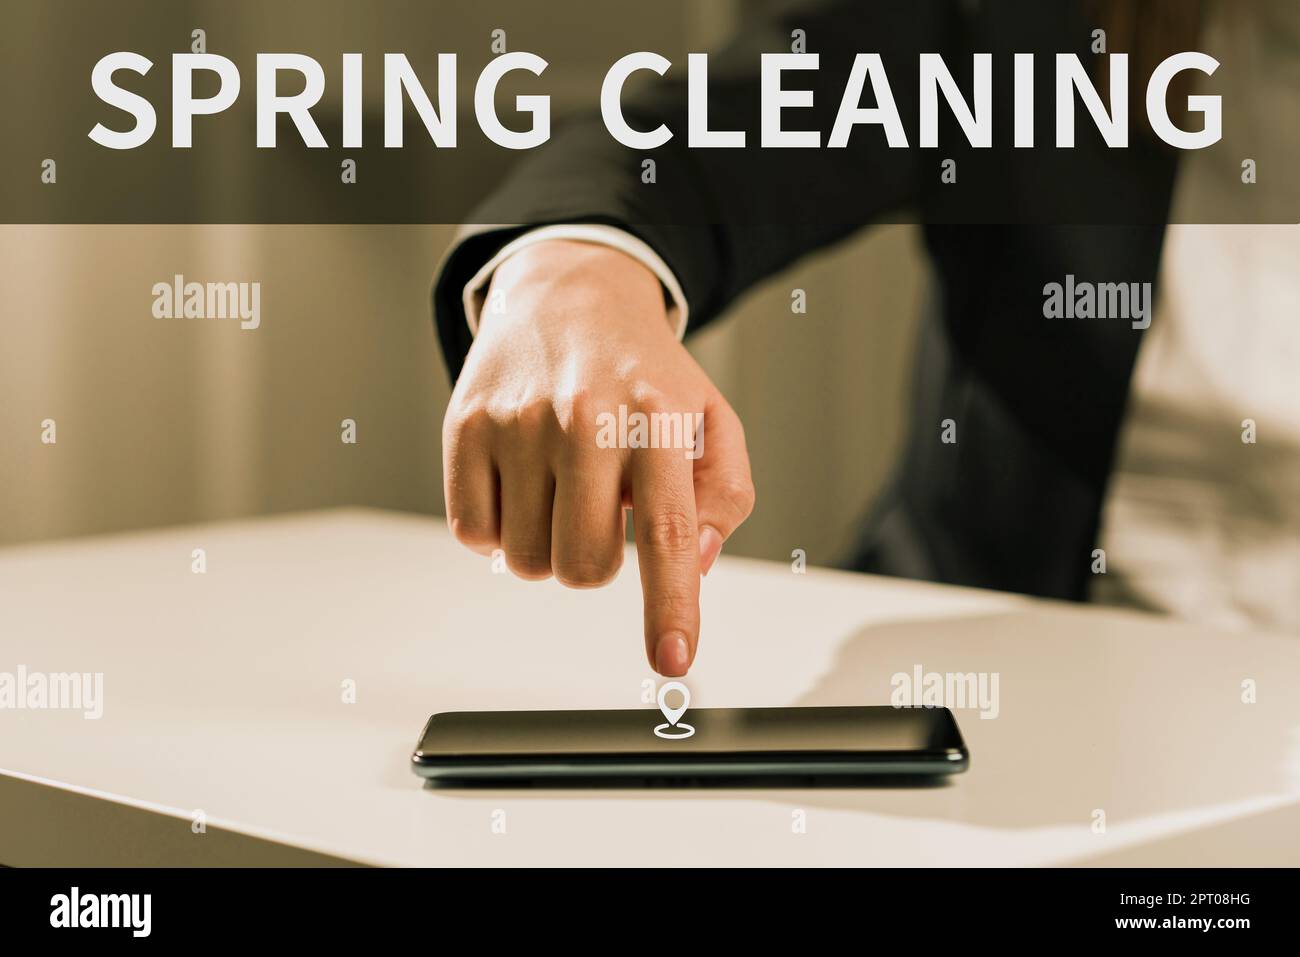 Text showing inspiration Speedy Deliveryprovide products in fast way or same day shipping overseas, Word Written on practice of thoroughly cleaning ho Stock Photo